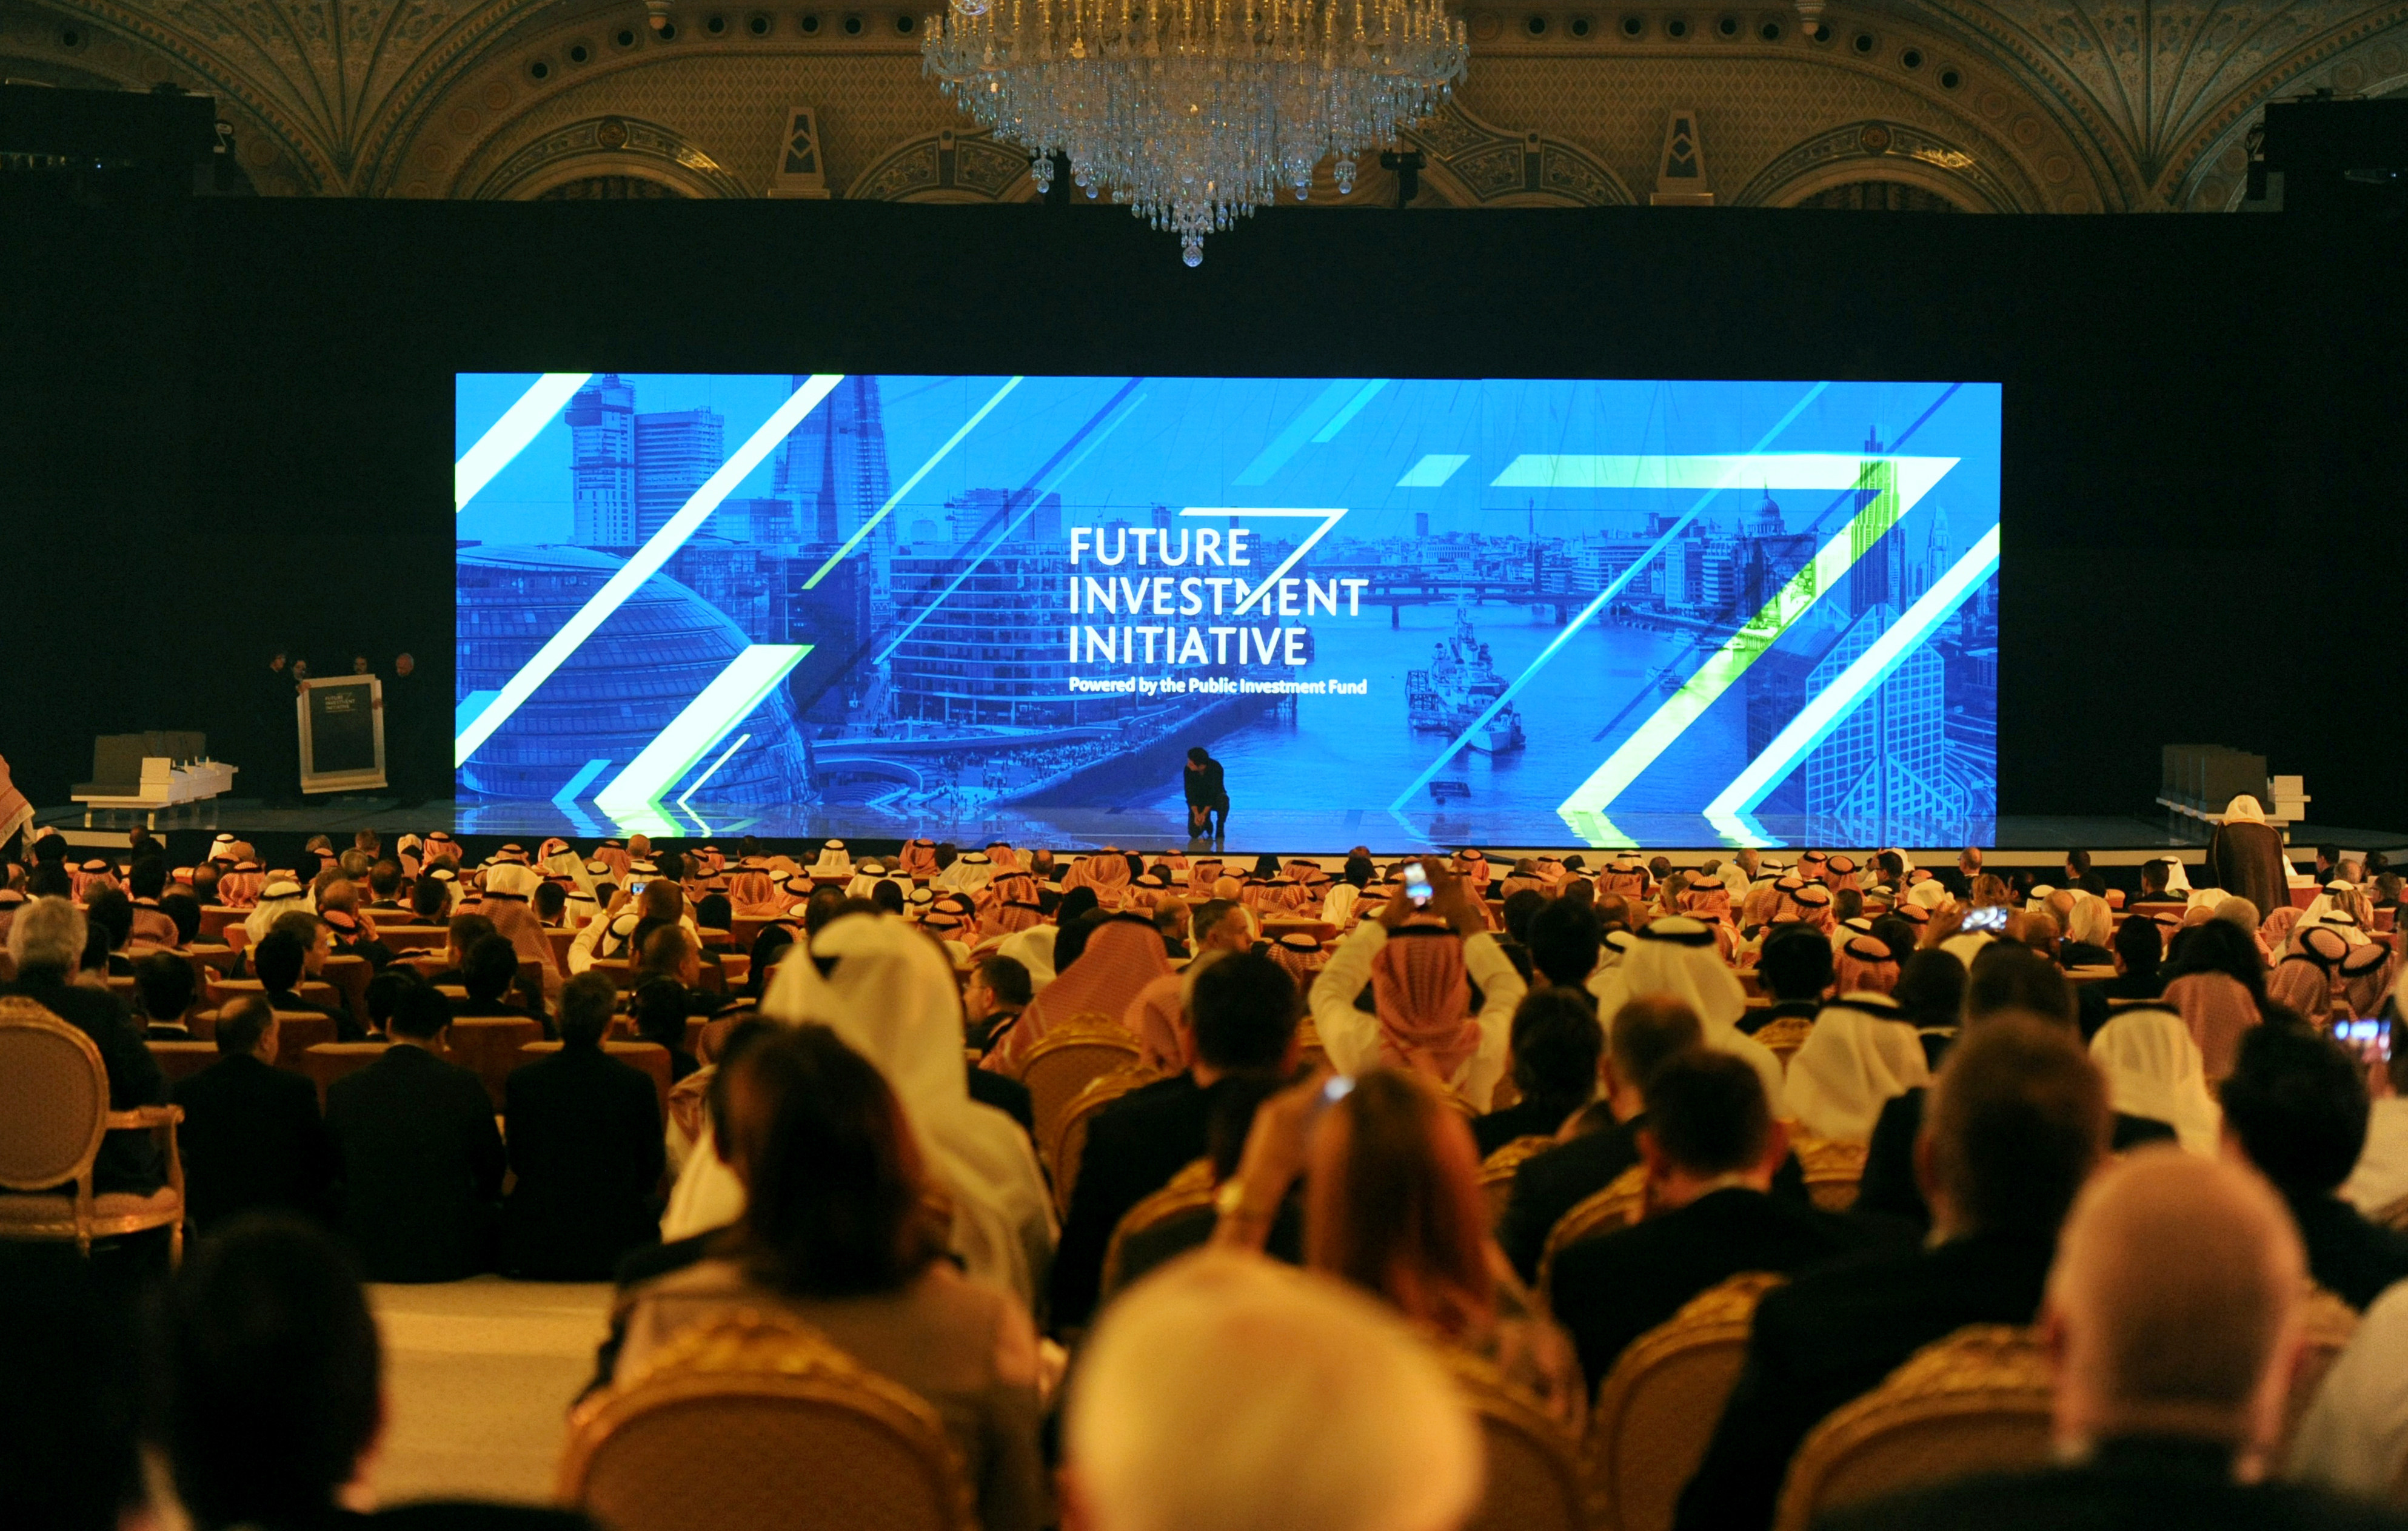 Attendees at the Future Investment Initiative (FII) conference in Riyadh on October 23, 2022. Photo: AFP